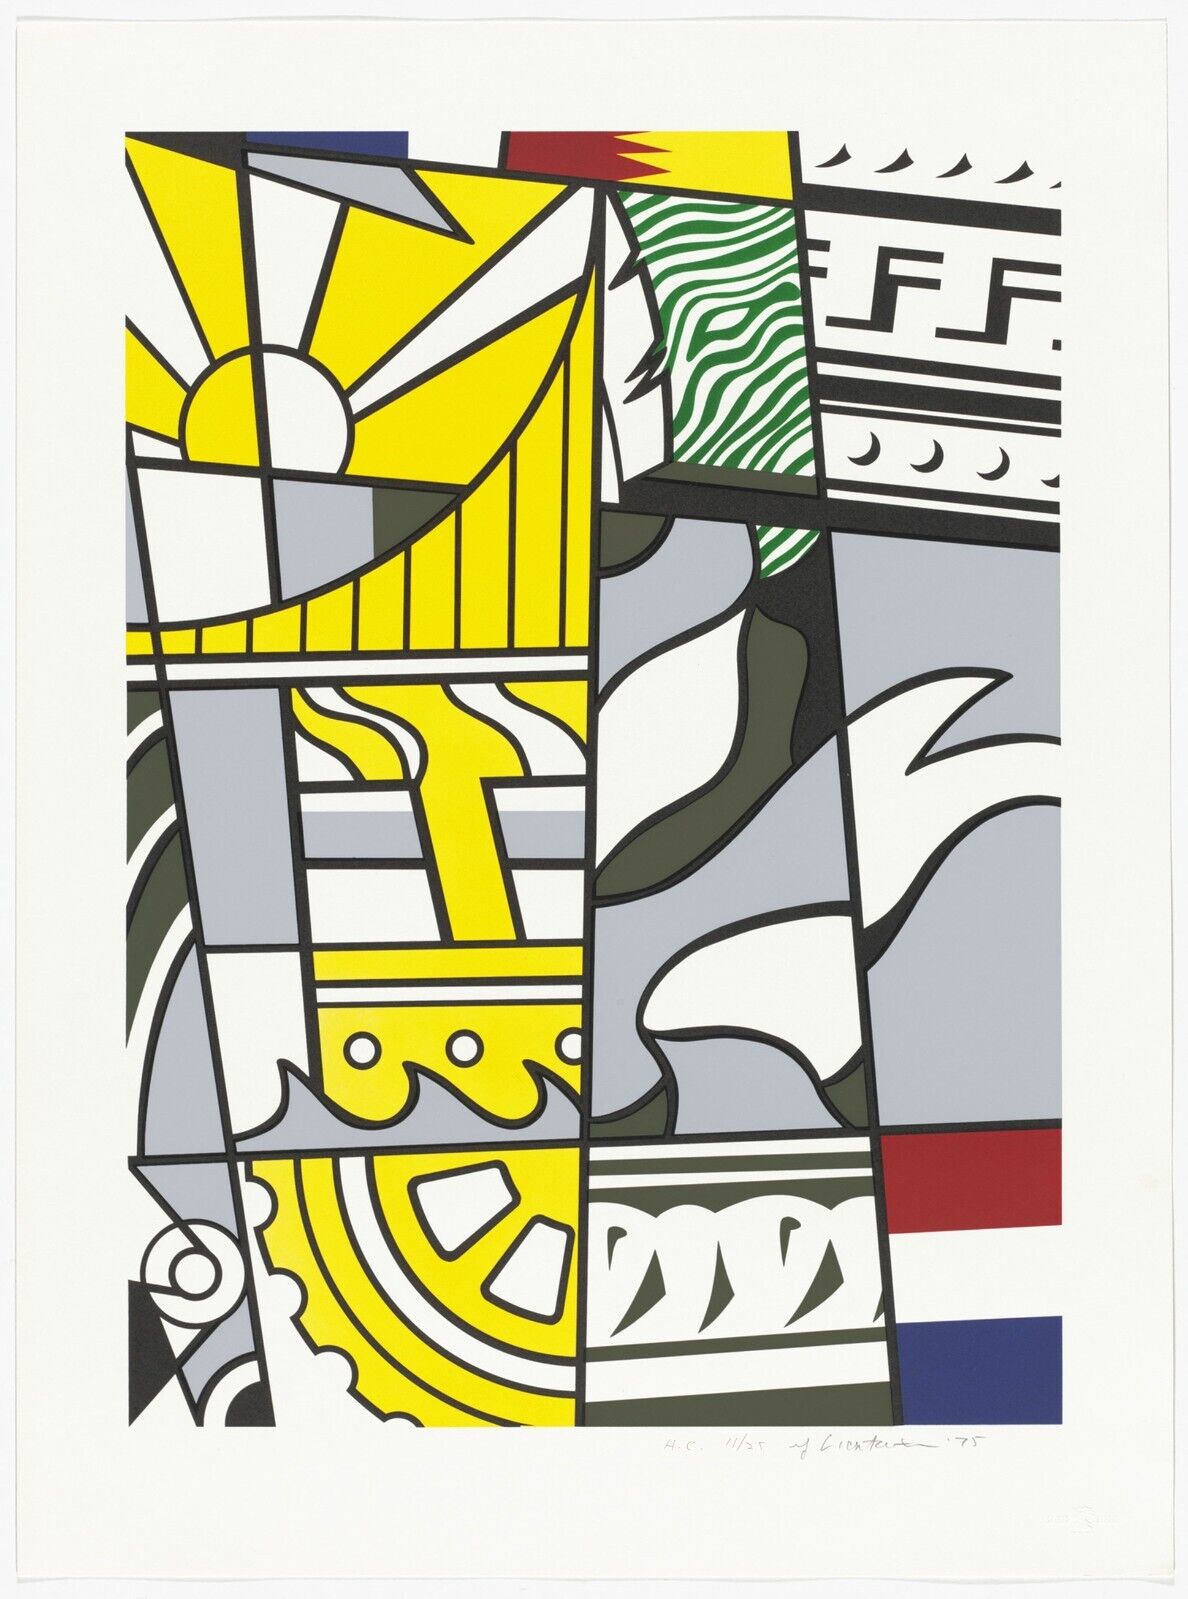 Detail The Full Sheet Unframed Roy Lichtenstein Bicentennial Print (Corlett 136), 1975, 7 color lithograph and silkscreen in red, blue, yellow, green, gray, olive and black on white wove paper